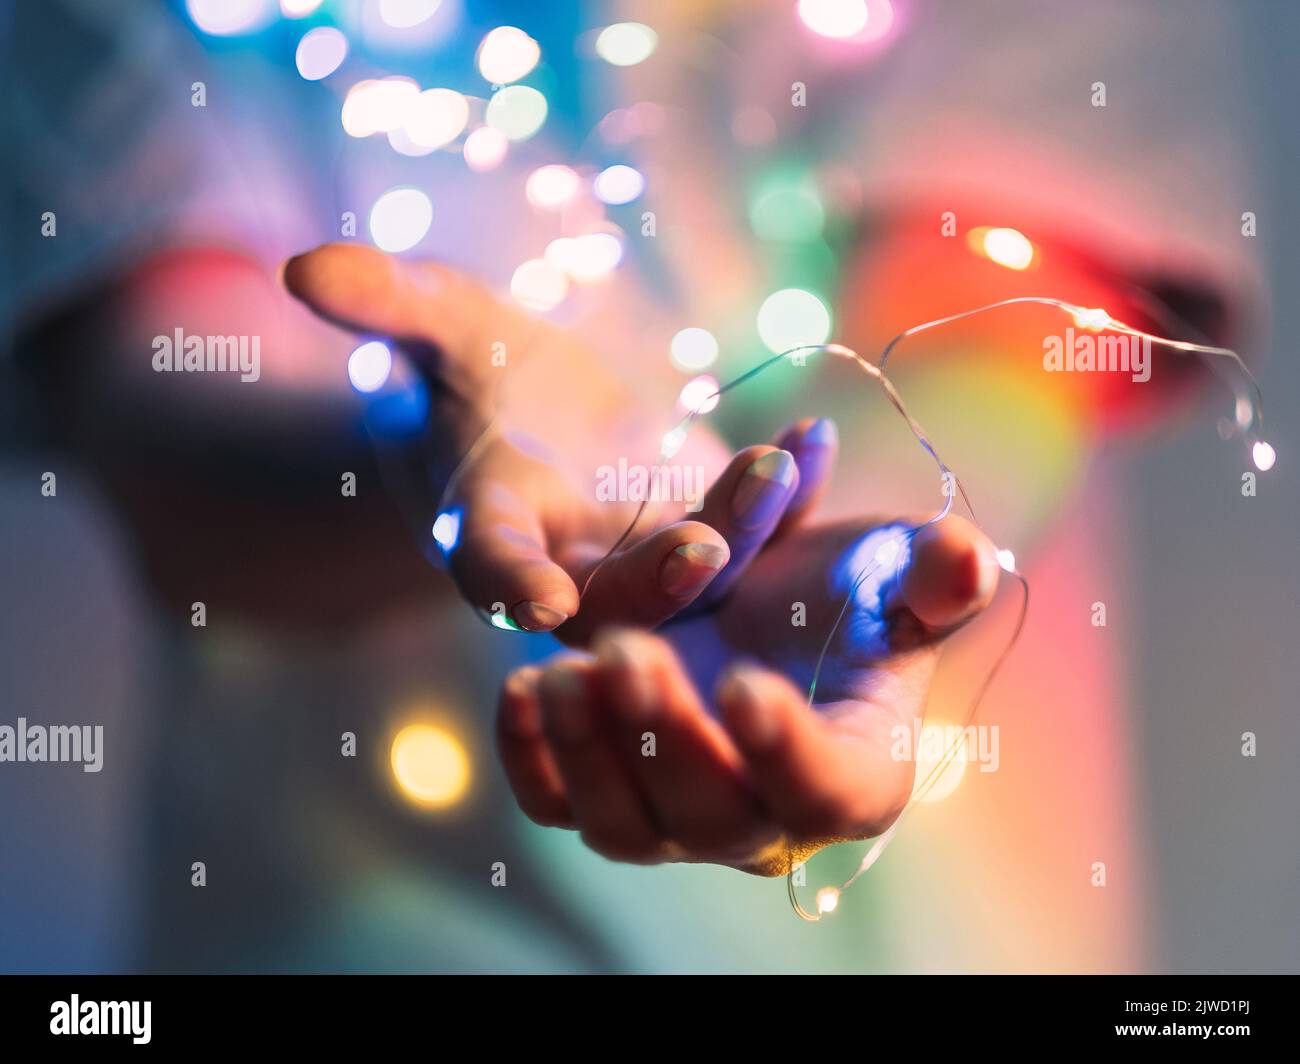 christmas bokeh lights party decoration hands Stock Photo